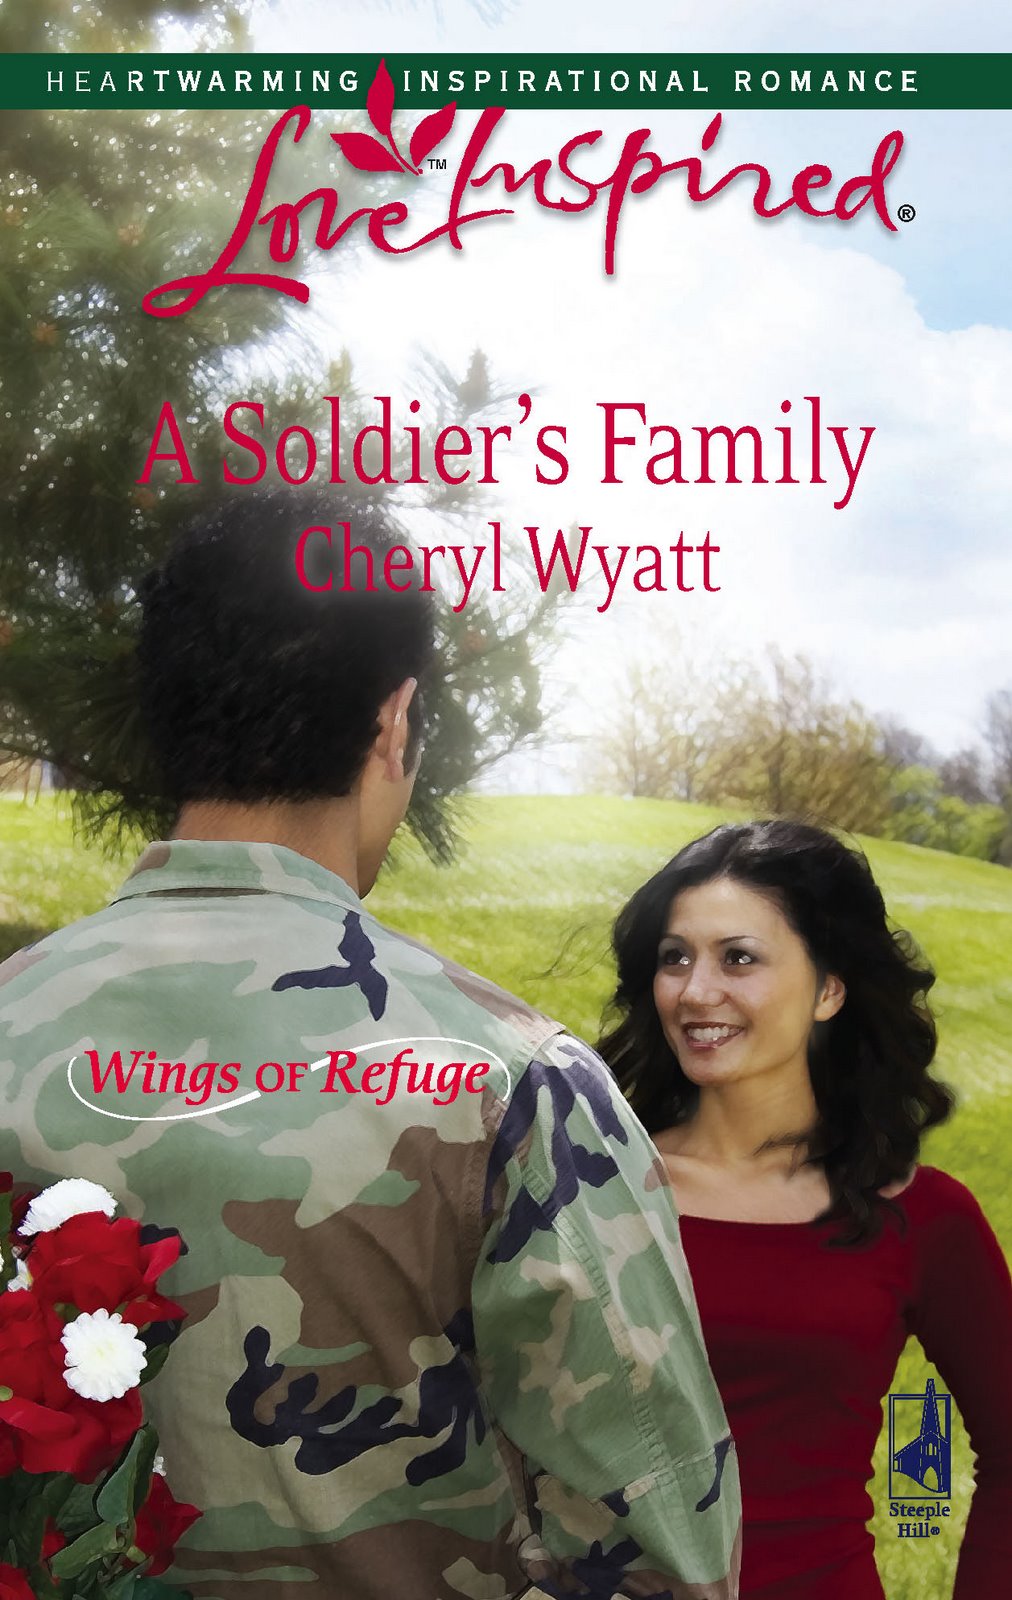 [Cover_A_Soldier's_Family.jpg]